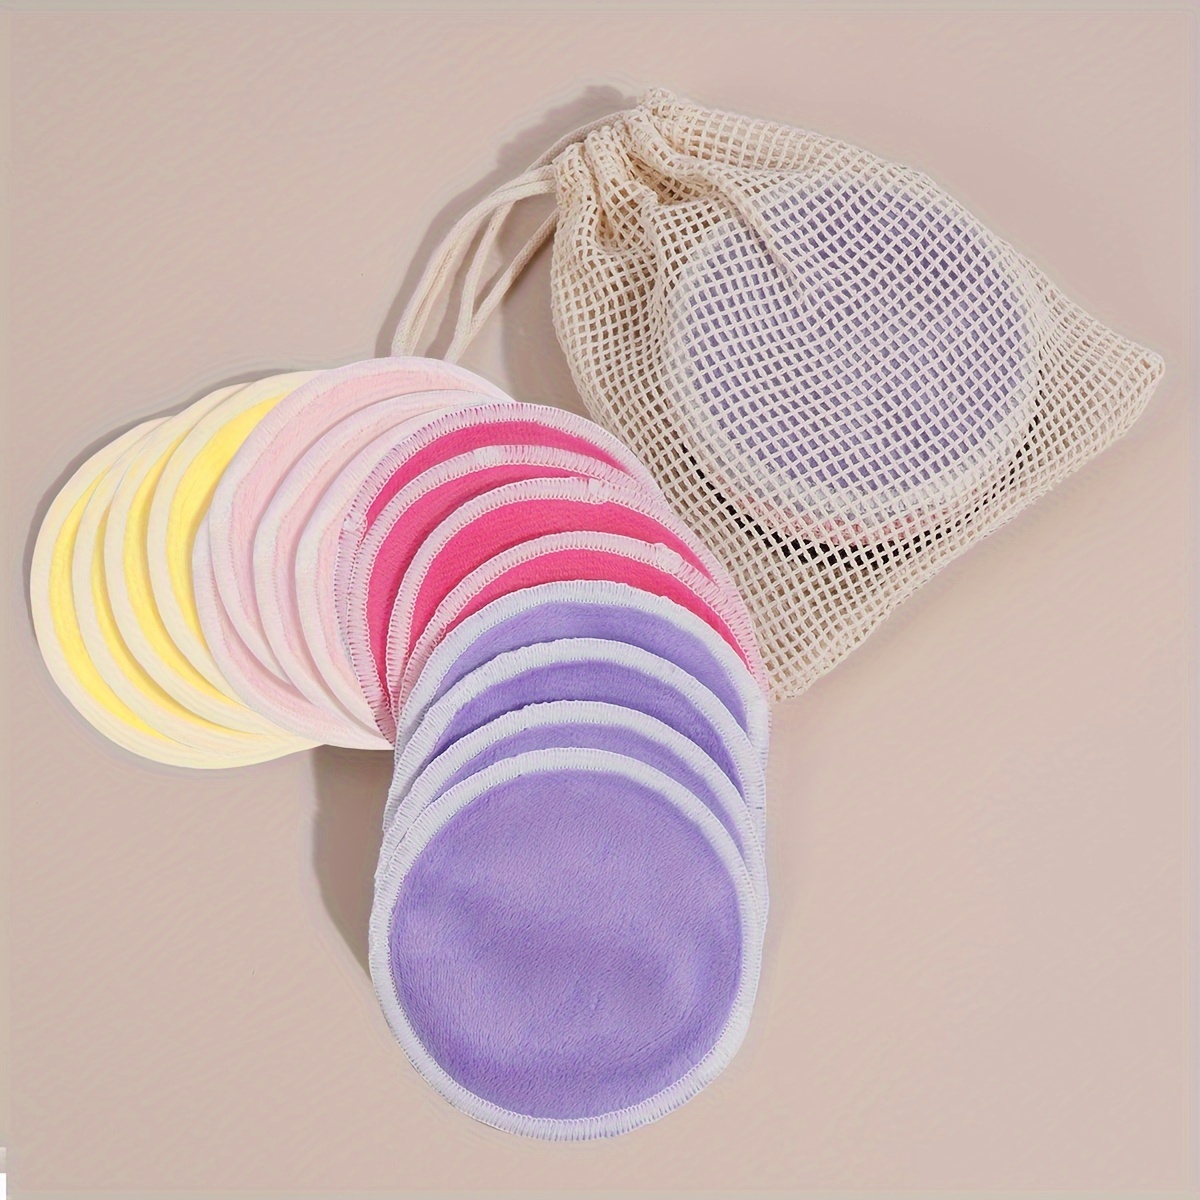 

16pcs Makeup Remover Towel Plus Wash Bag, Reusable, Suitable For All Skin Types, Facial Cleansing Tool, Face Wash Puff, Makeup Remover Pad, Machine Washable